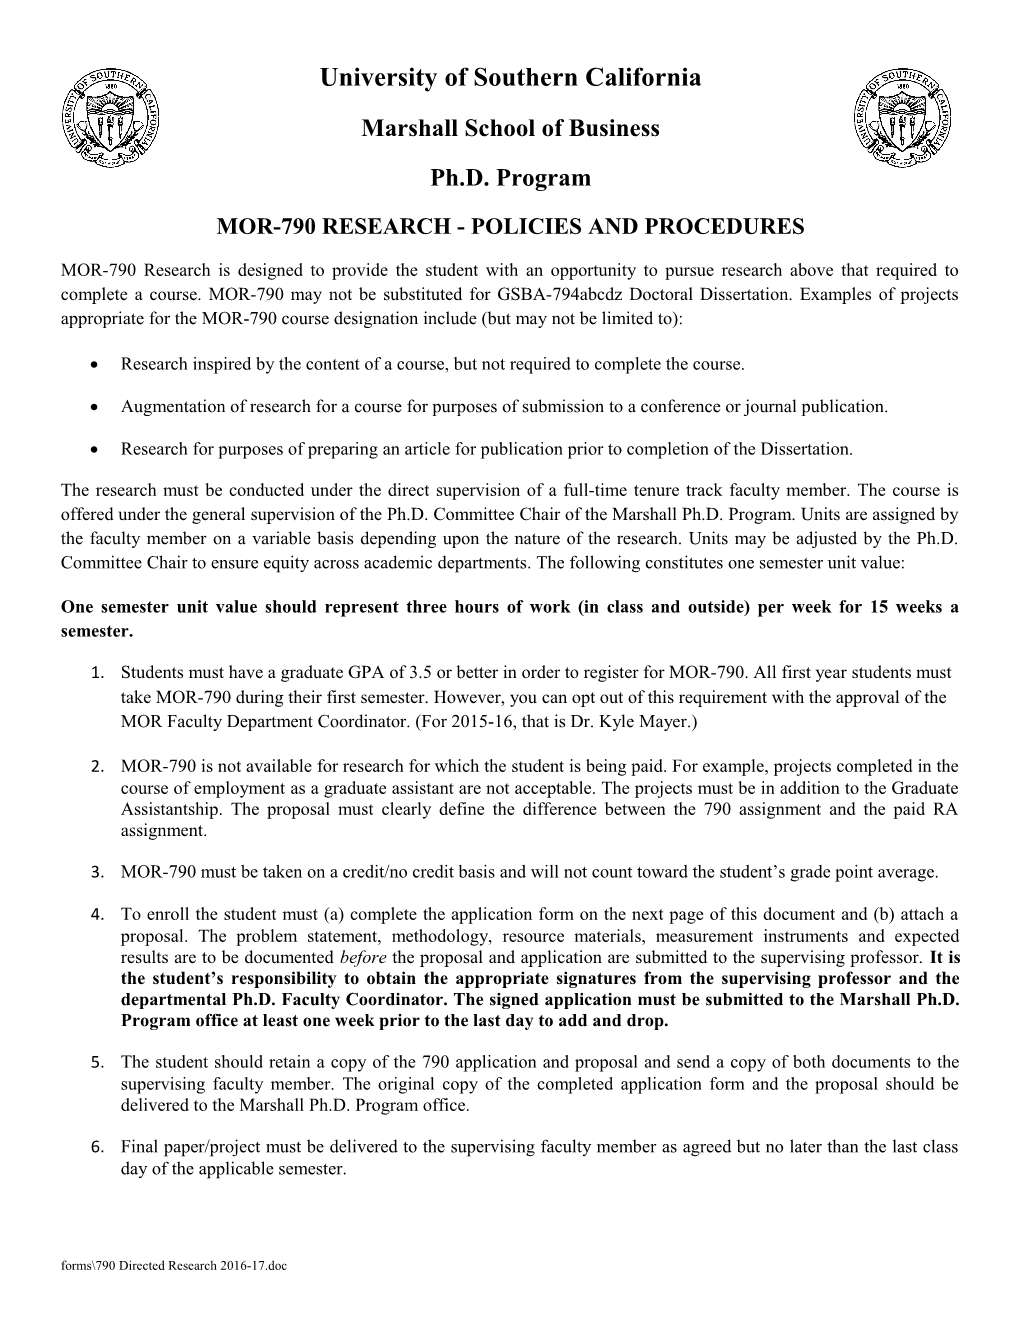 Mor-790 Research - Policies and Procedures